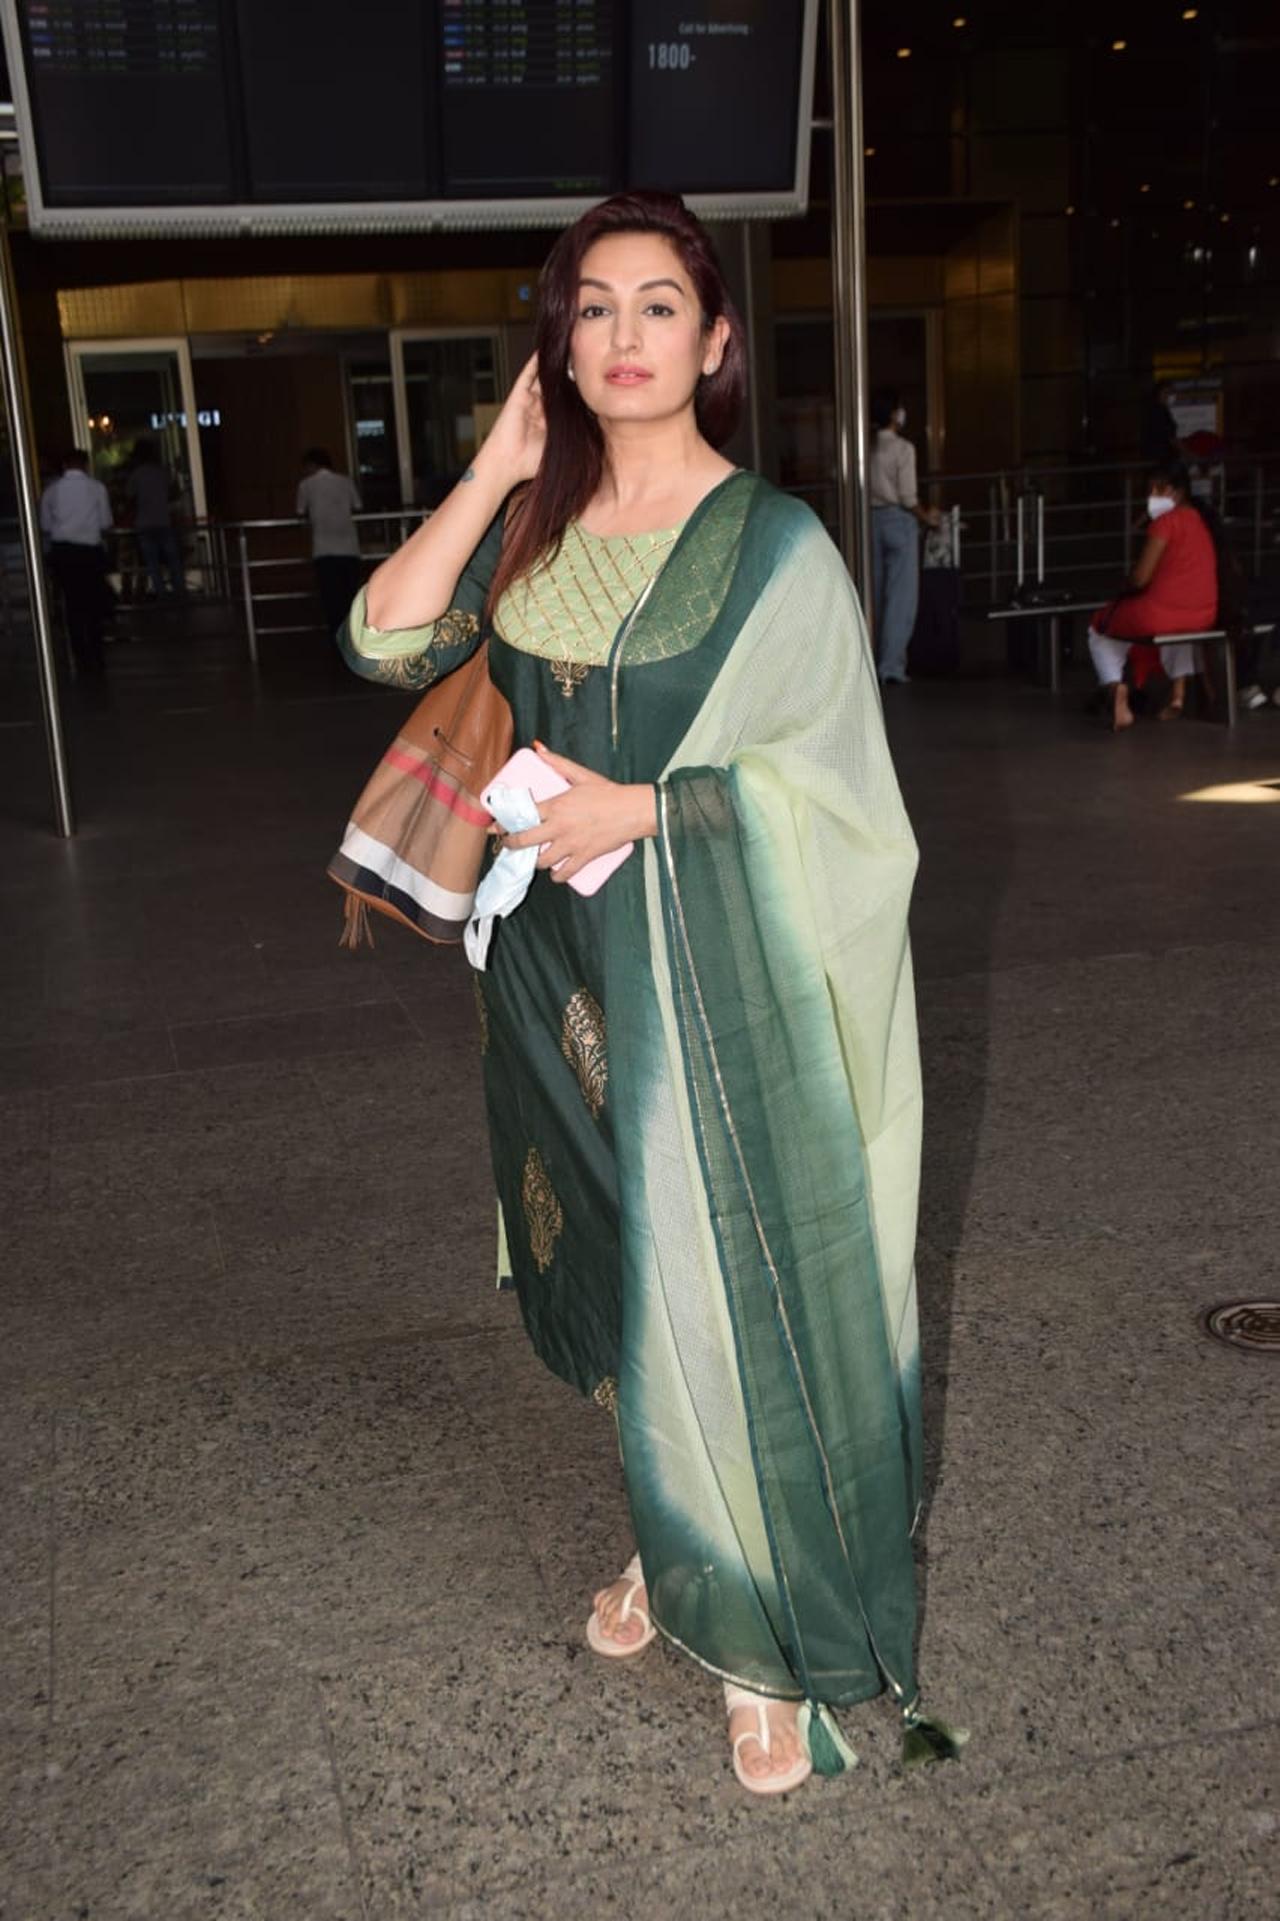 Akriti Kakar, who currently seen in the music reality show Indian Pro Music League, too was snapped at Mumbai Airport. The singer looked beautiful in ethnic wear.